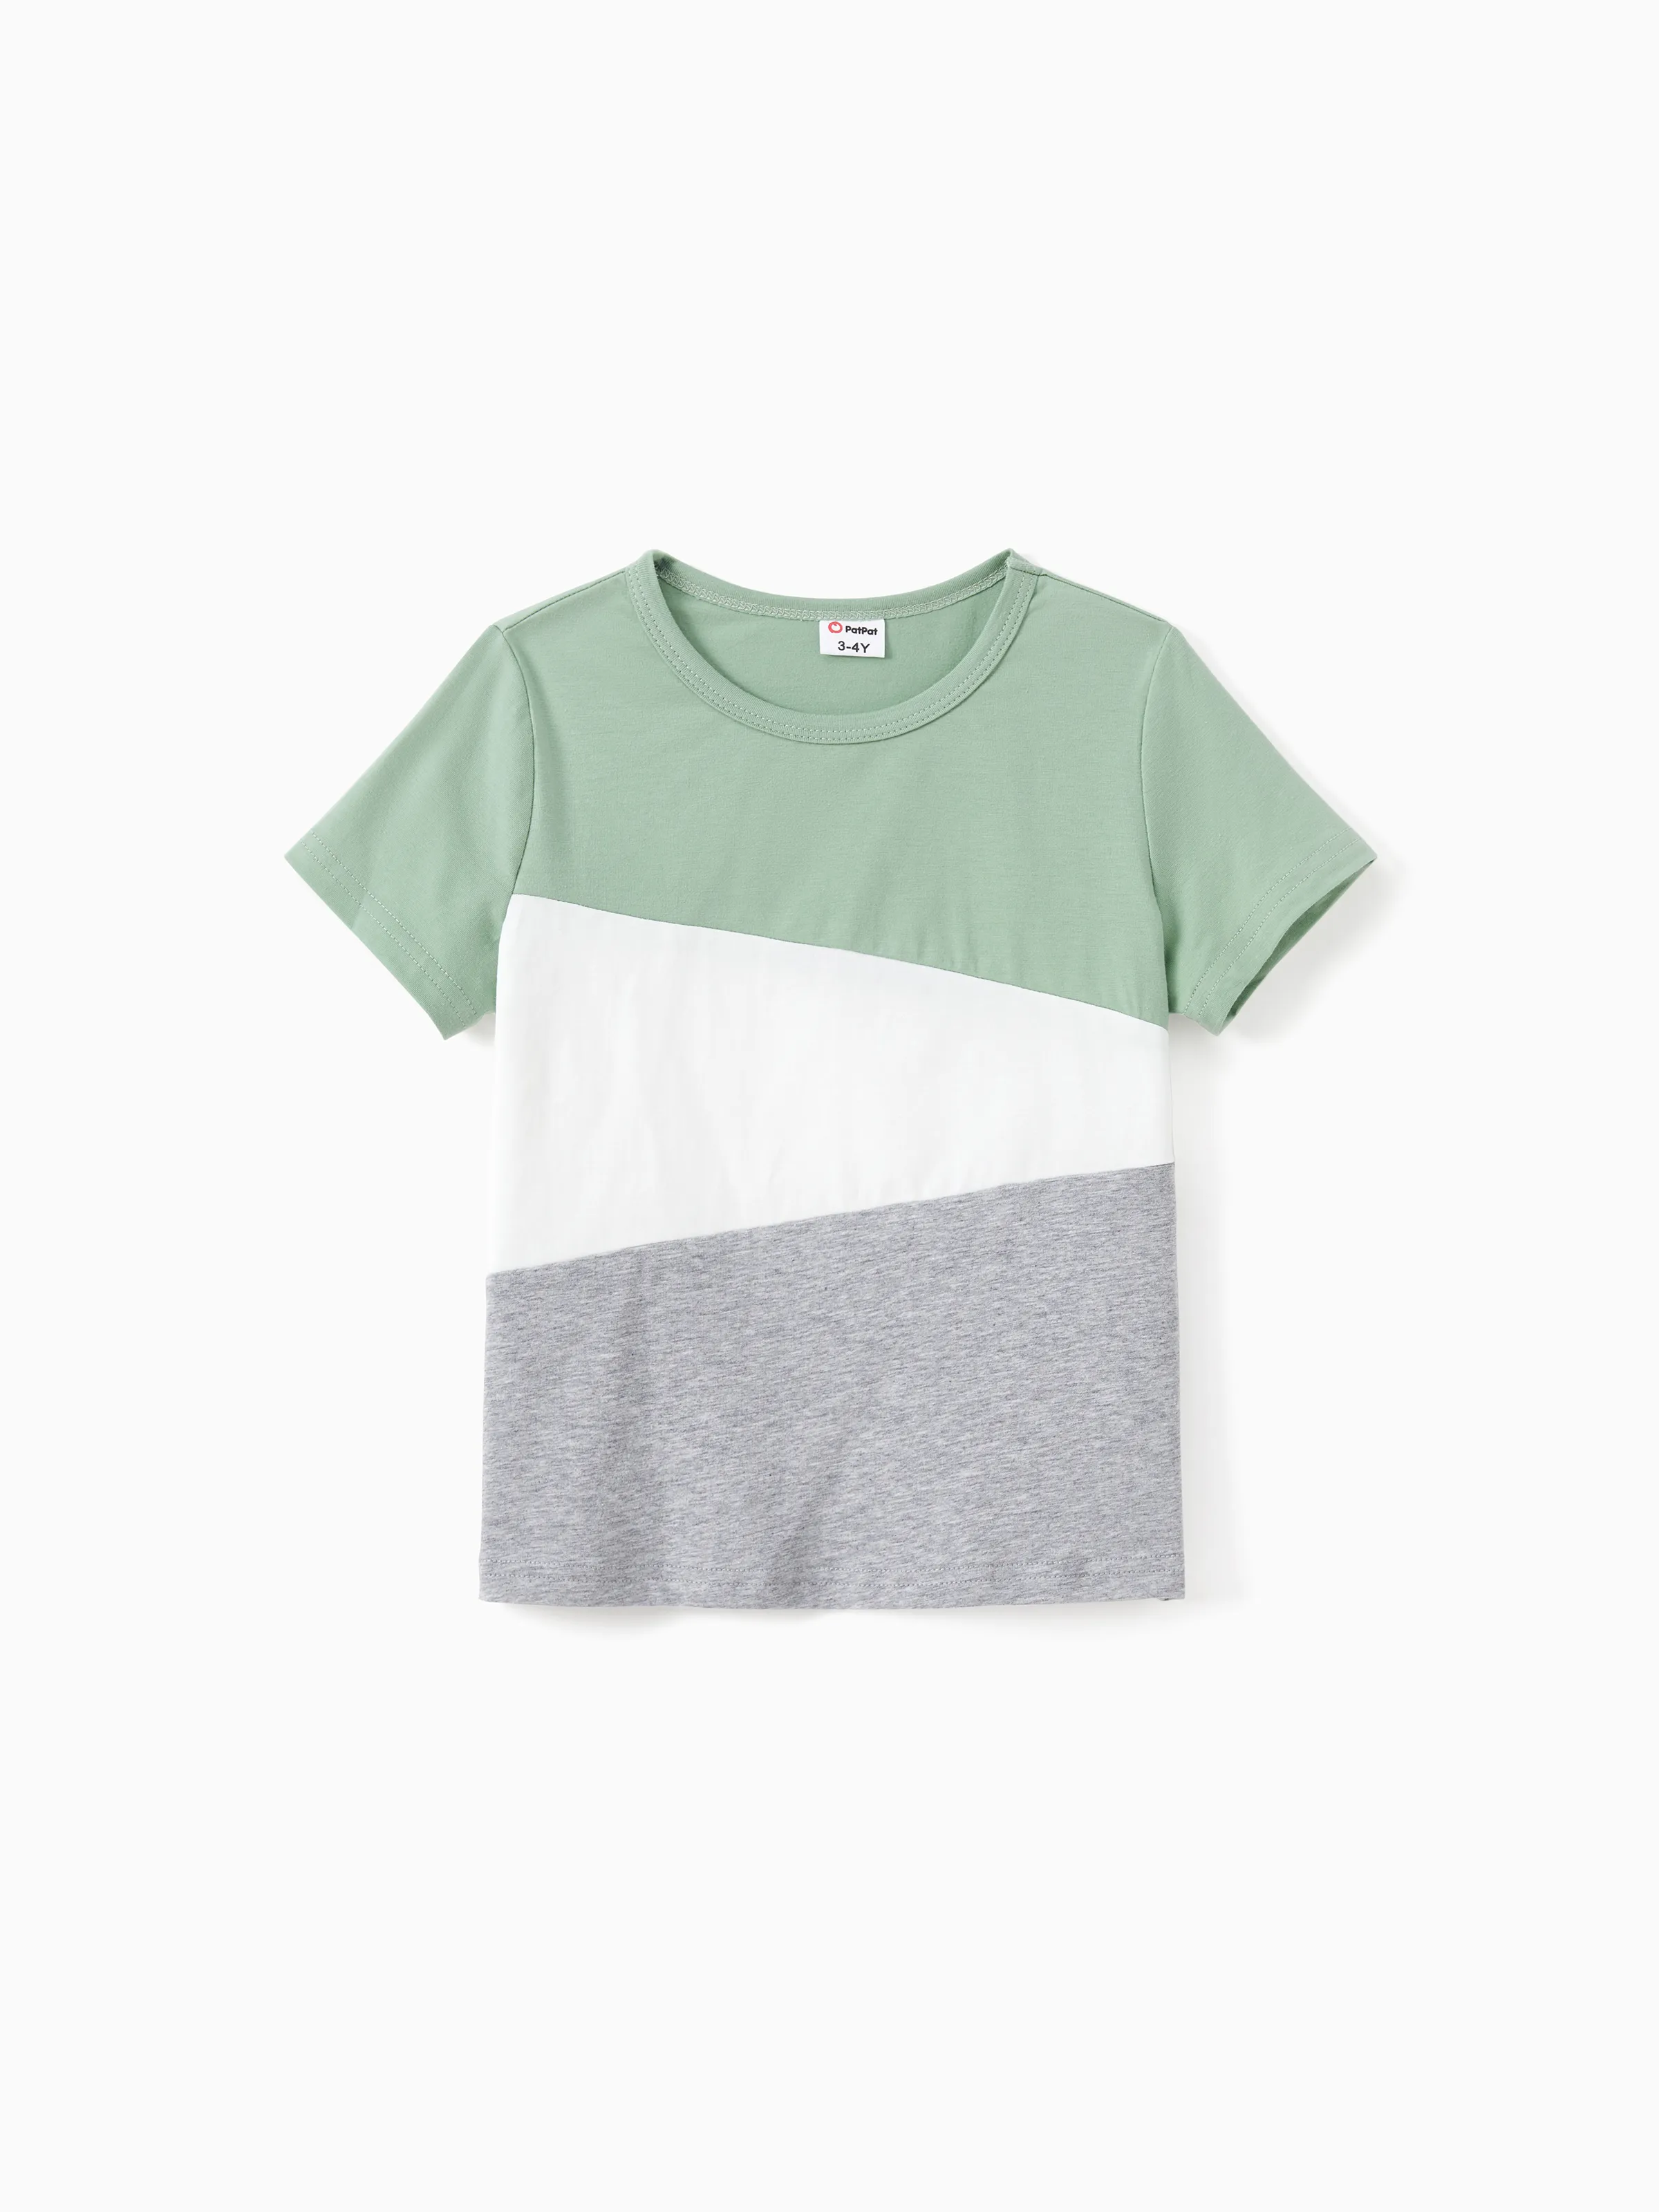 

Family Matching Color Block Tee or Green Cami Top Spliced Tulle Strap Dress